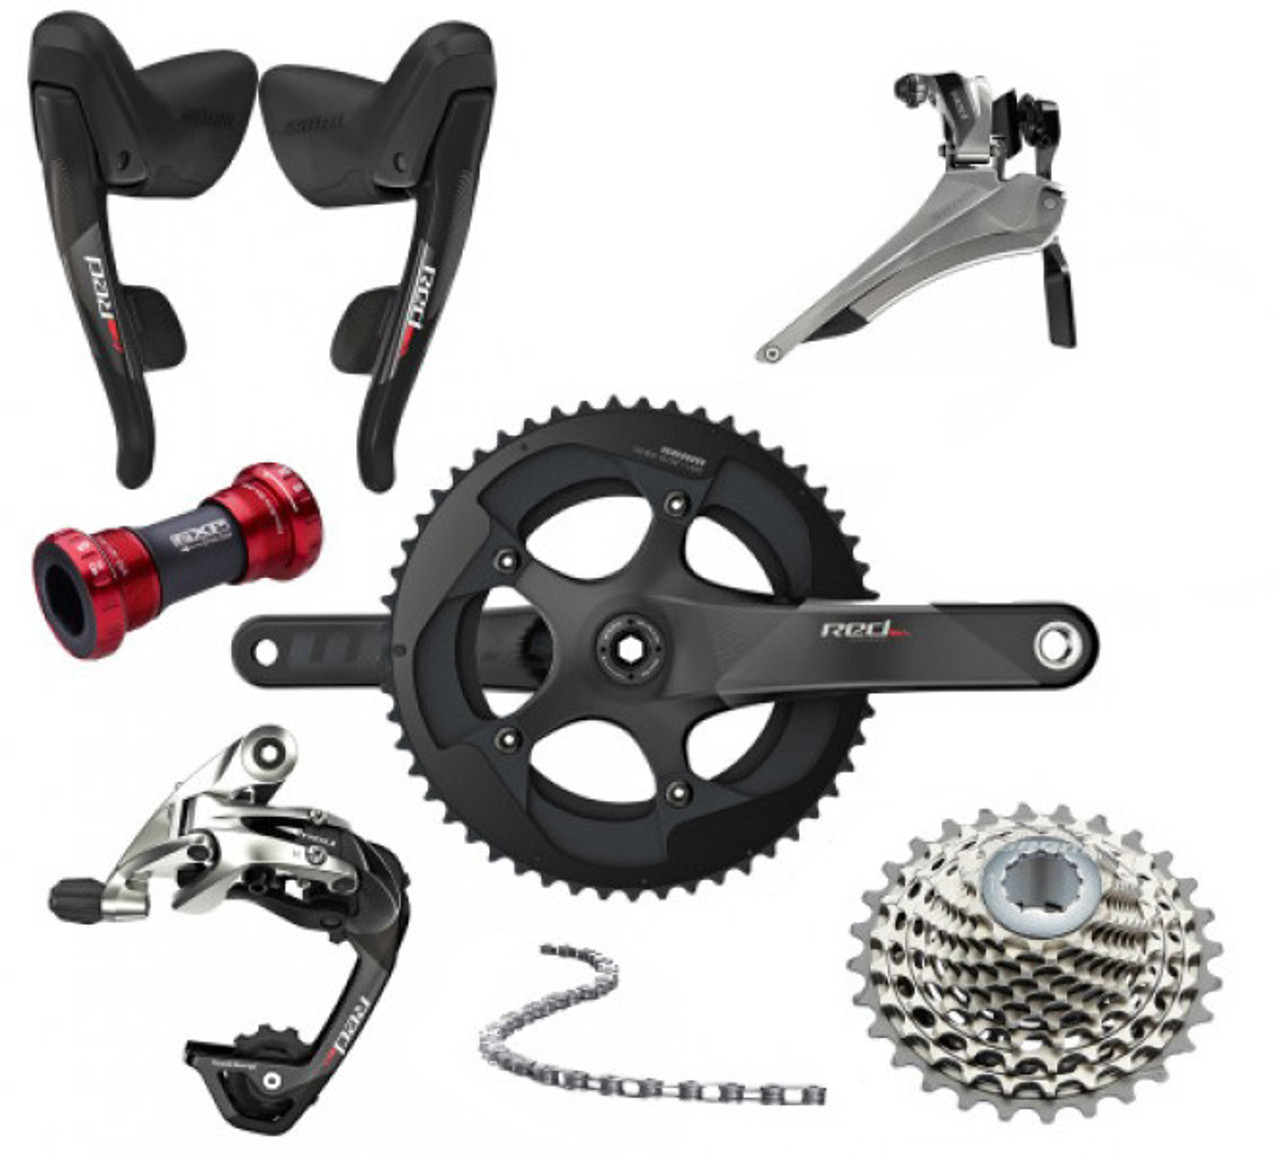 Texas Cyclesport SRAM RED 22 Groupset (less calipers) 2017-18 SRAM-RED22-7-2017 1541.99 New